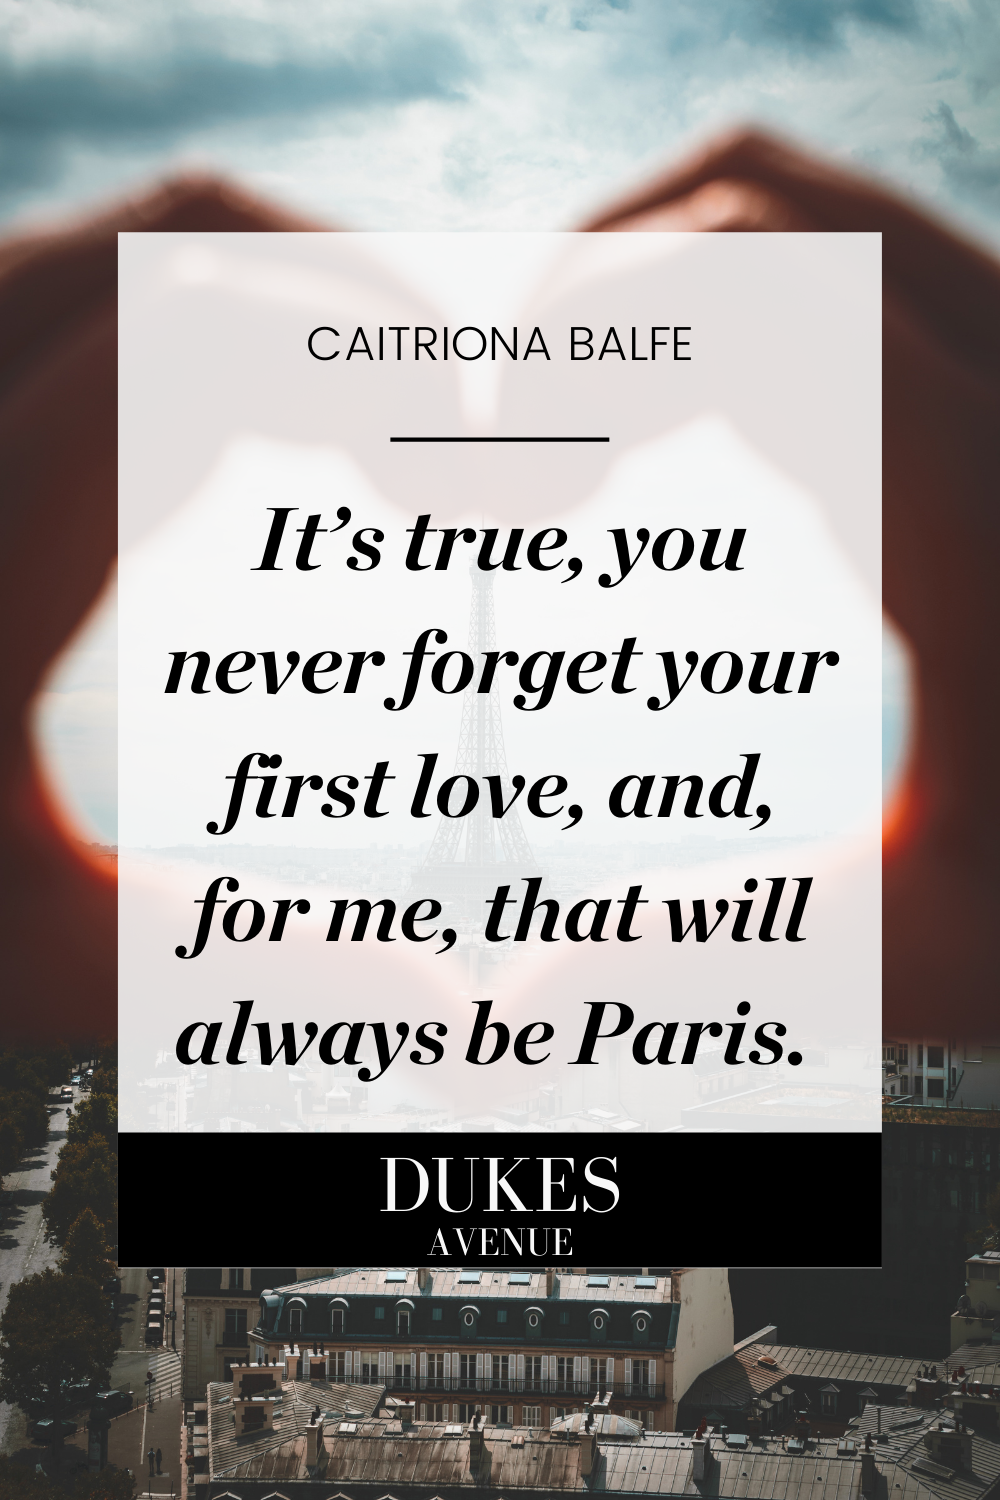 Picture of hands making a heart around the Eiffel Tower with text overlay of one of Caitriona Balfe's quotes about Paris